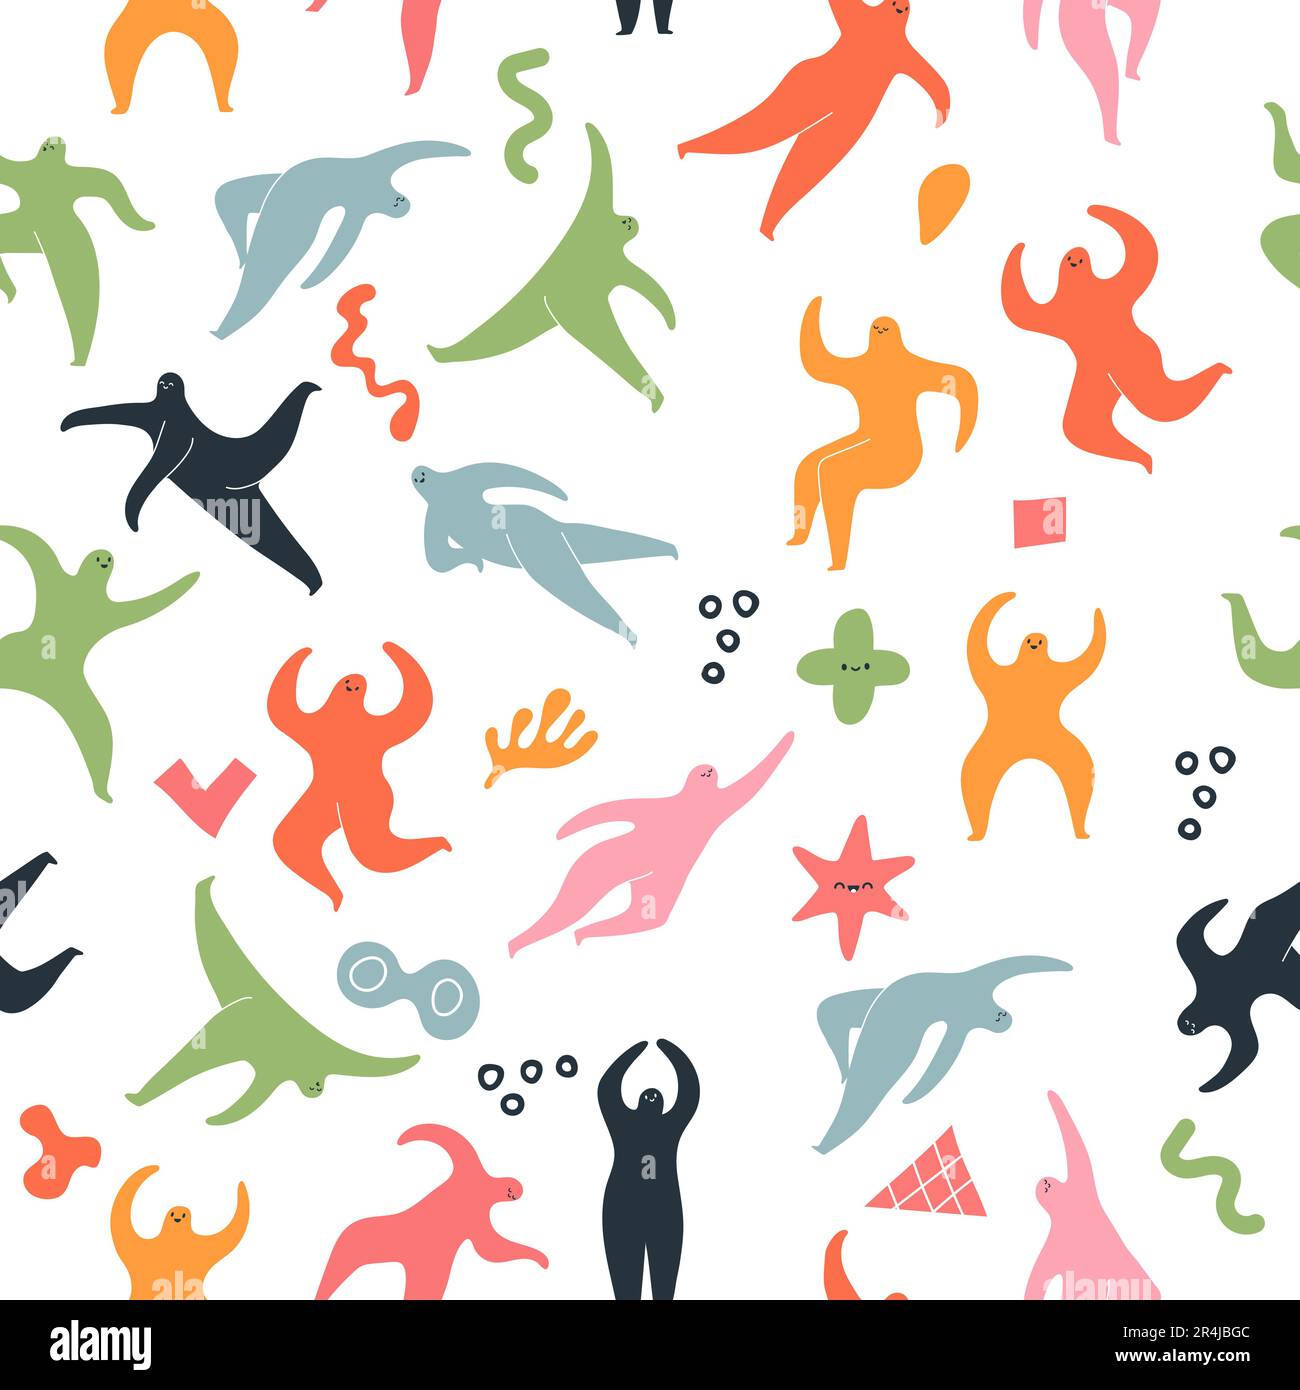 Abstract people pattern. various stylized forms different shapes ...